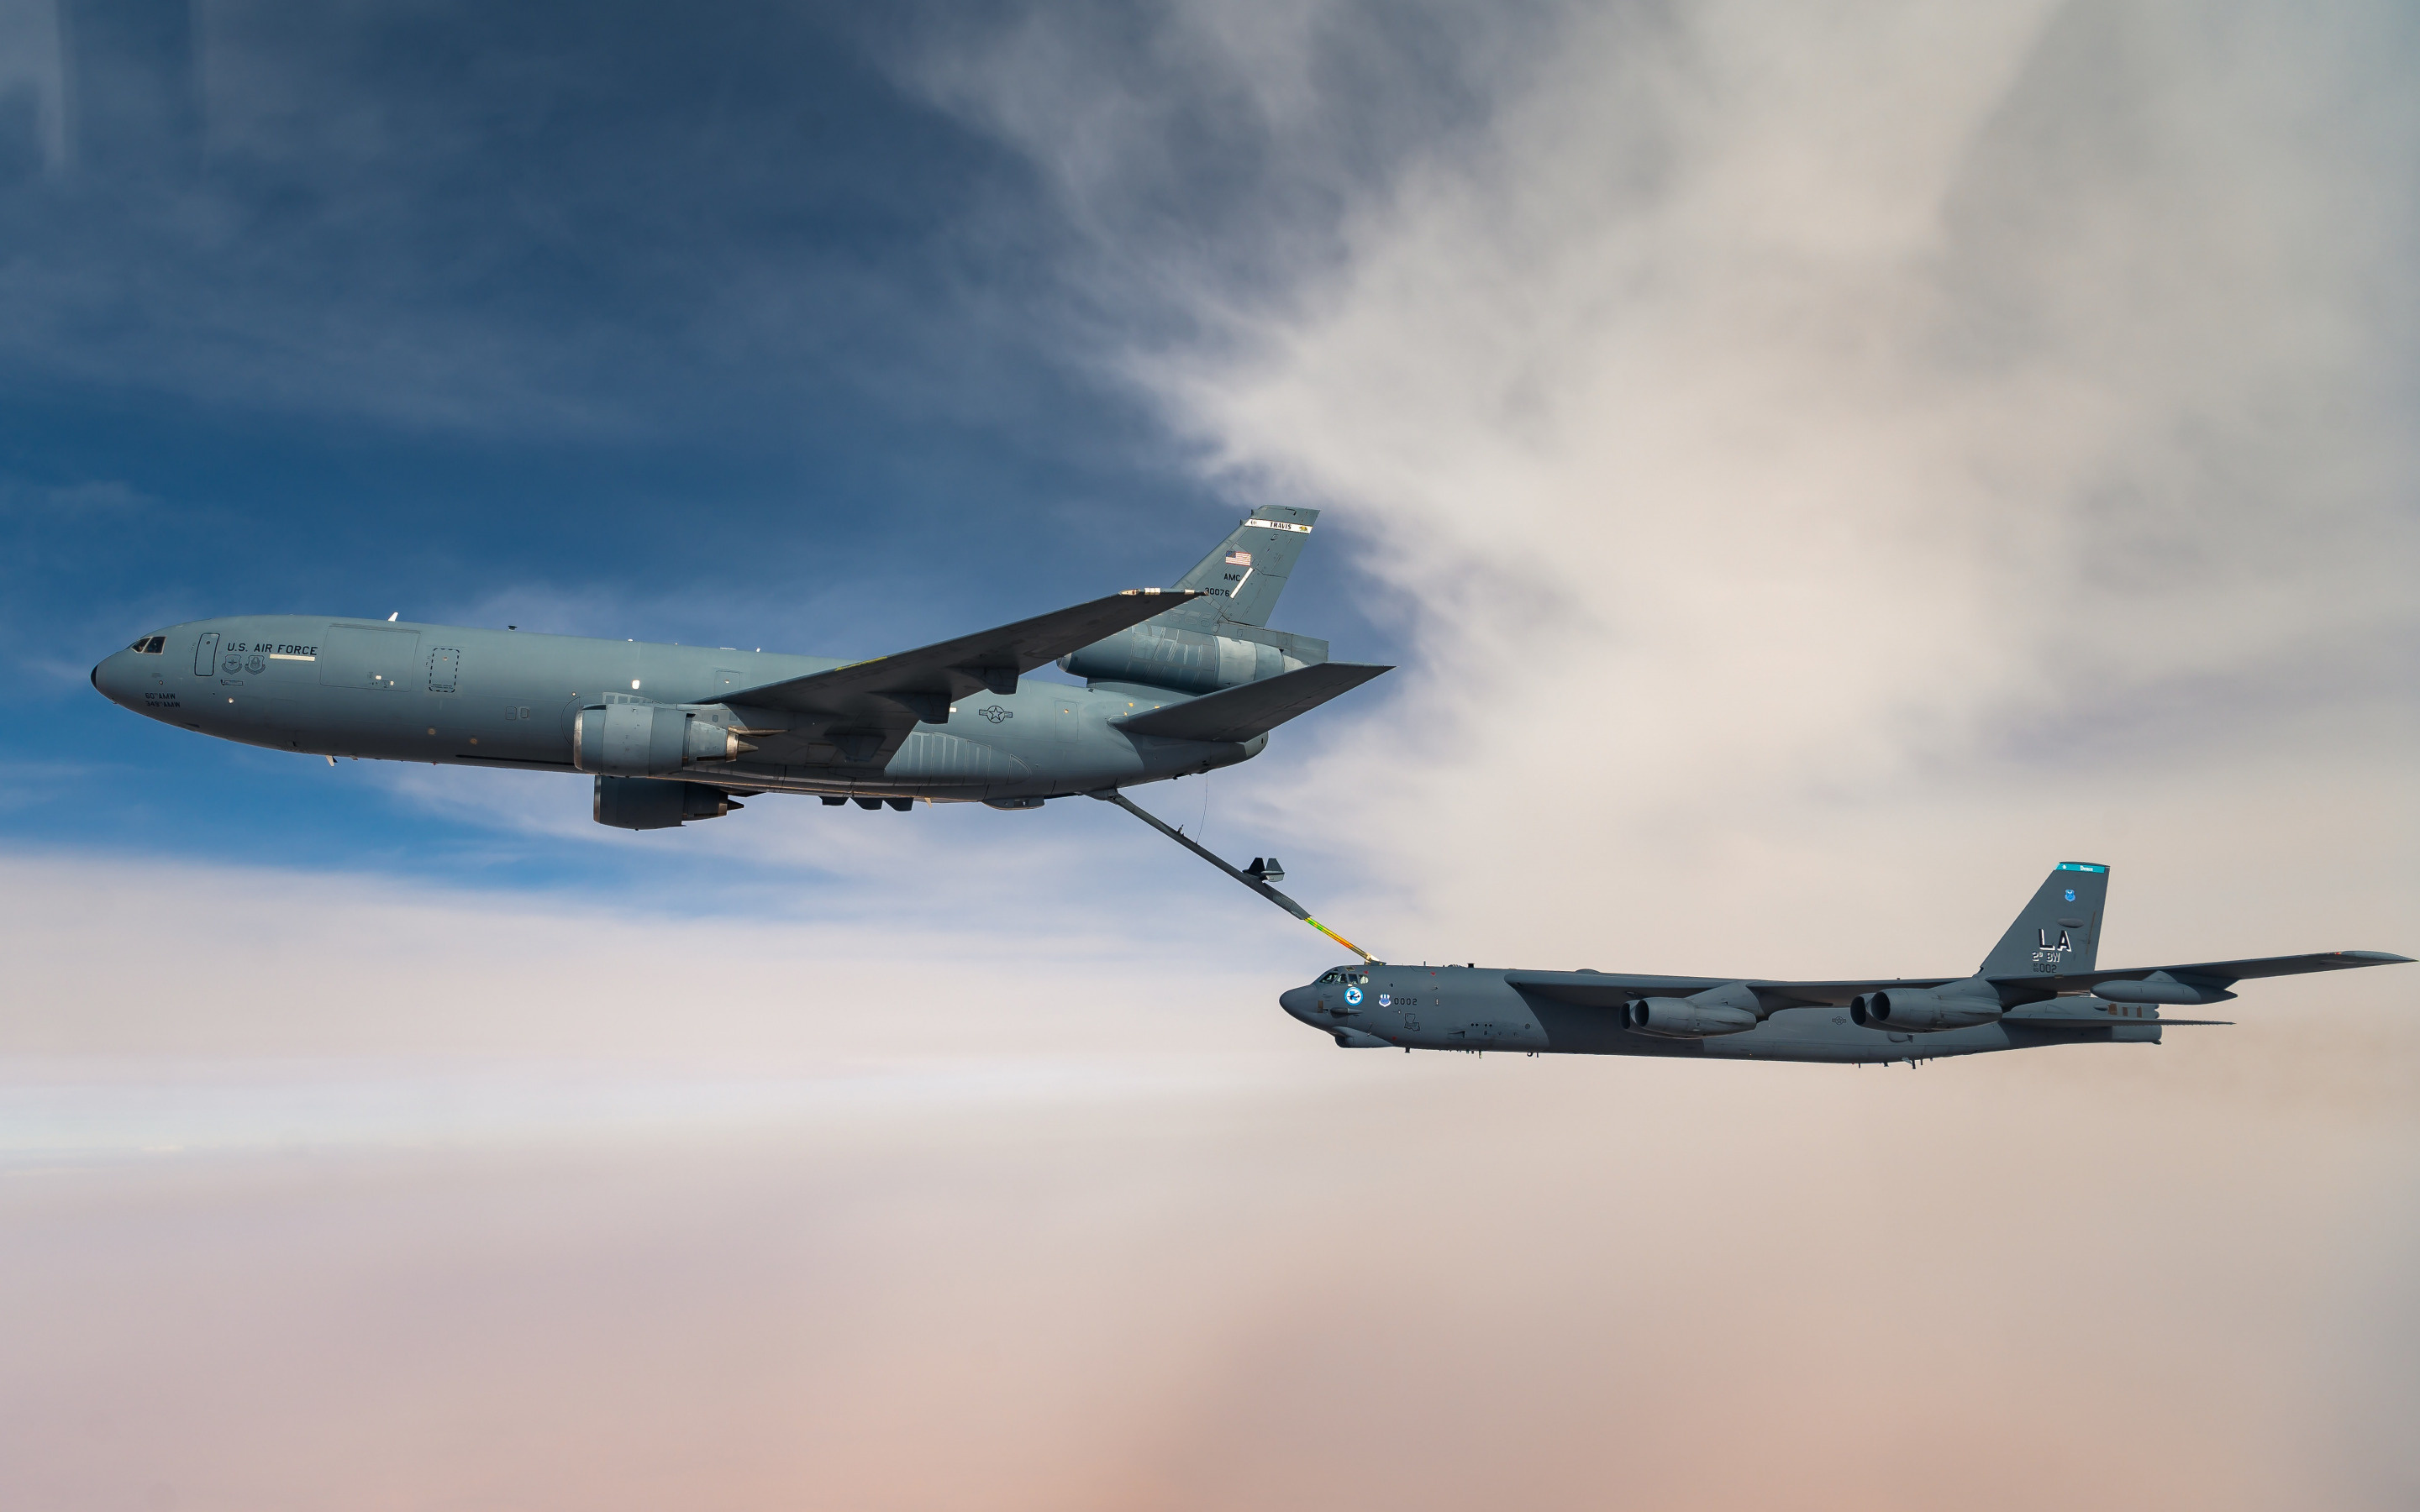 KC-10 Extender, American tanker aircraft, Boeing B-52 Stratofortress, United States Air Force, 2880x1800 HD Desktop